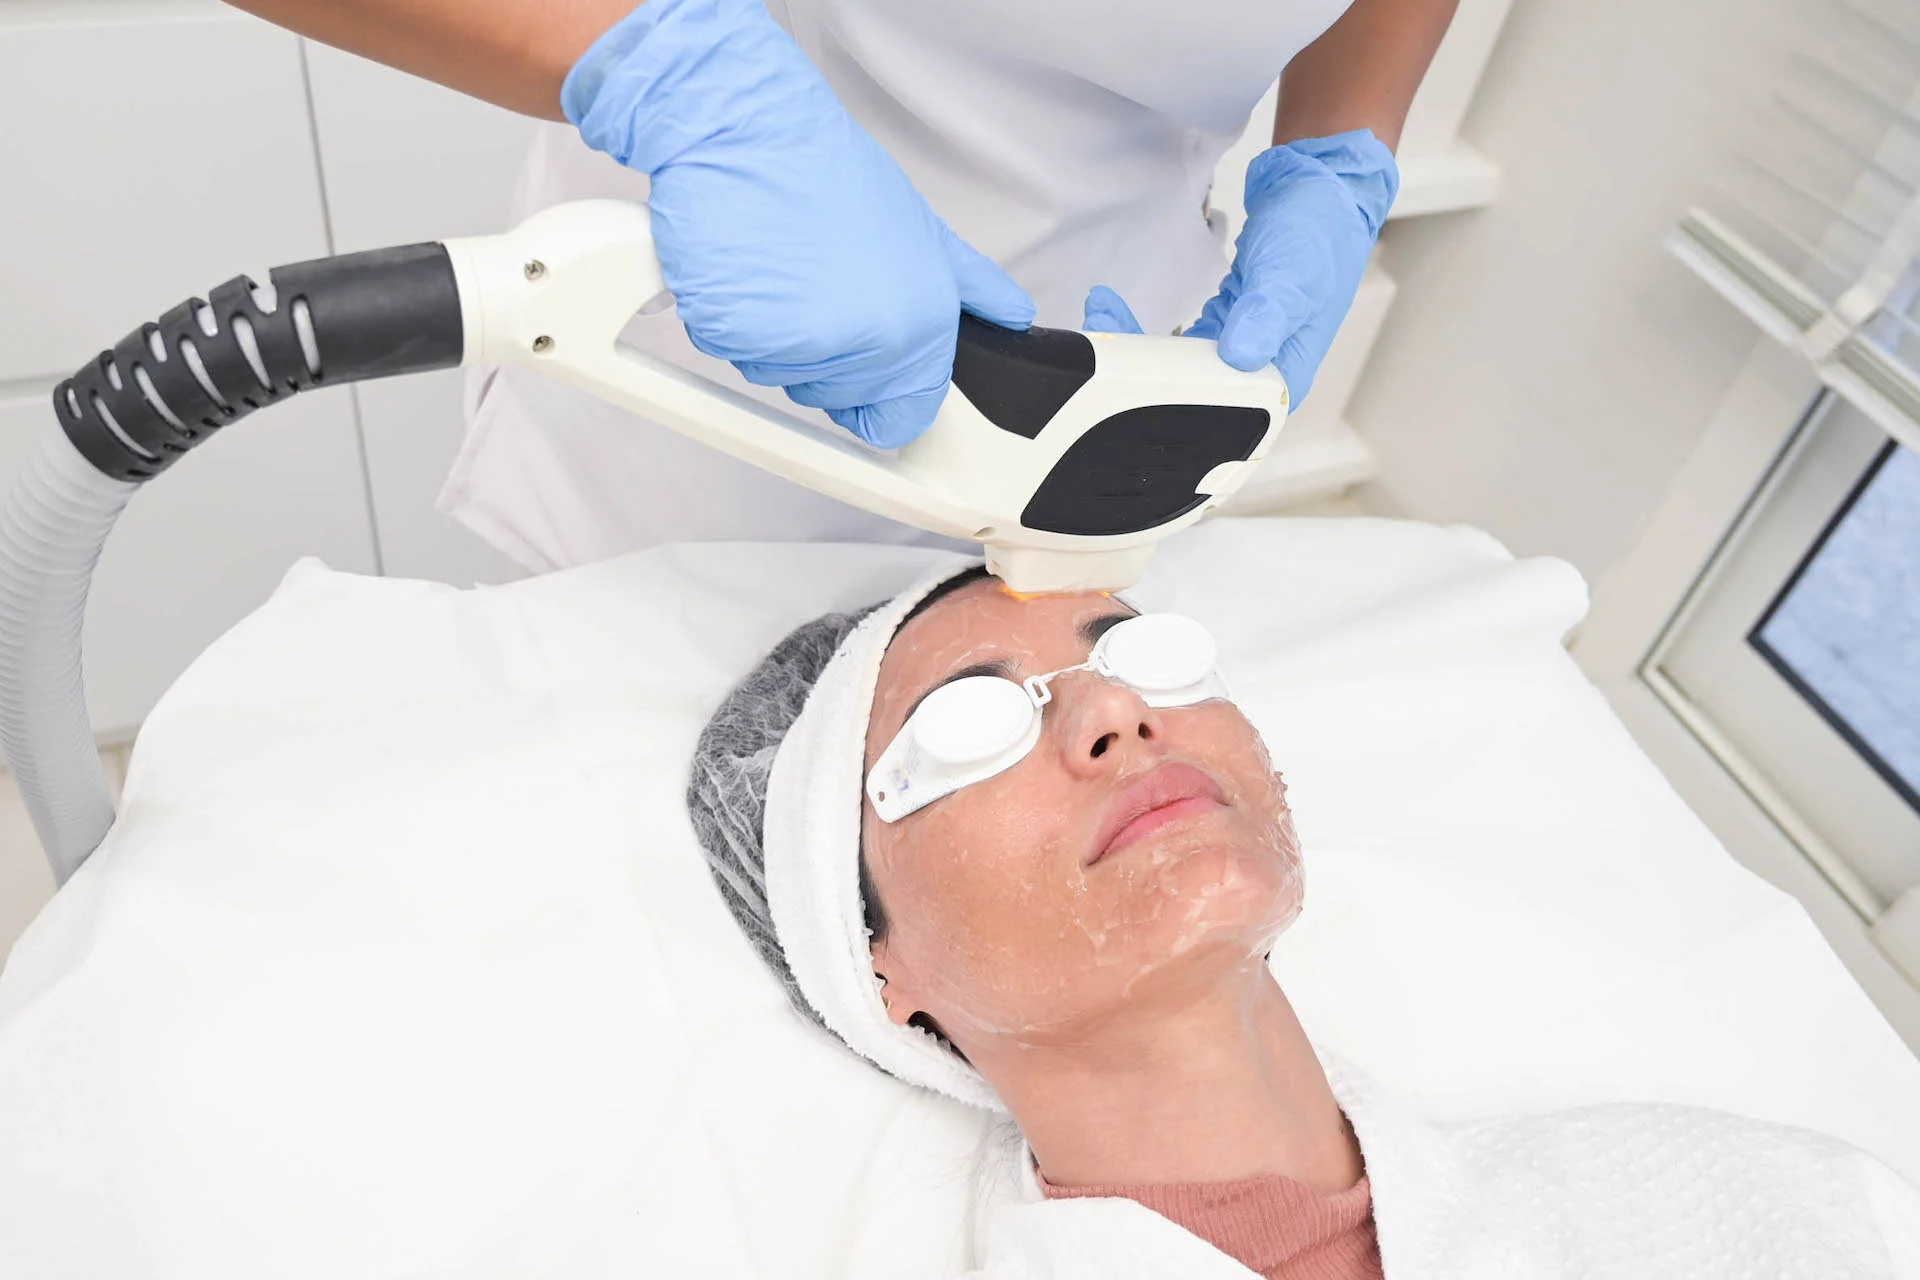 Viora IPL for restoring the beauty and balance of the skin - rejuvenate your skin with the treatment that uses heat and light to target specific skin concerns.